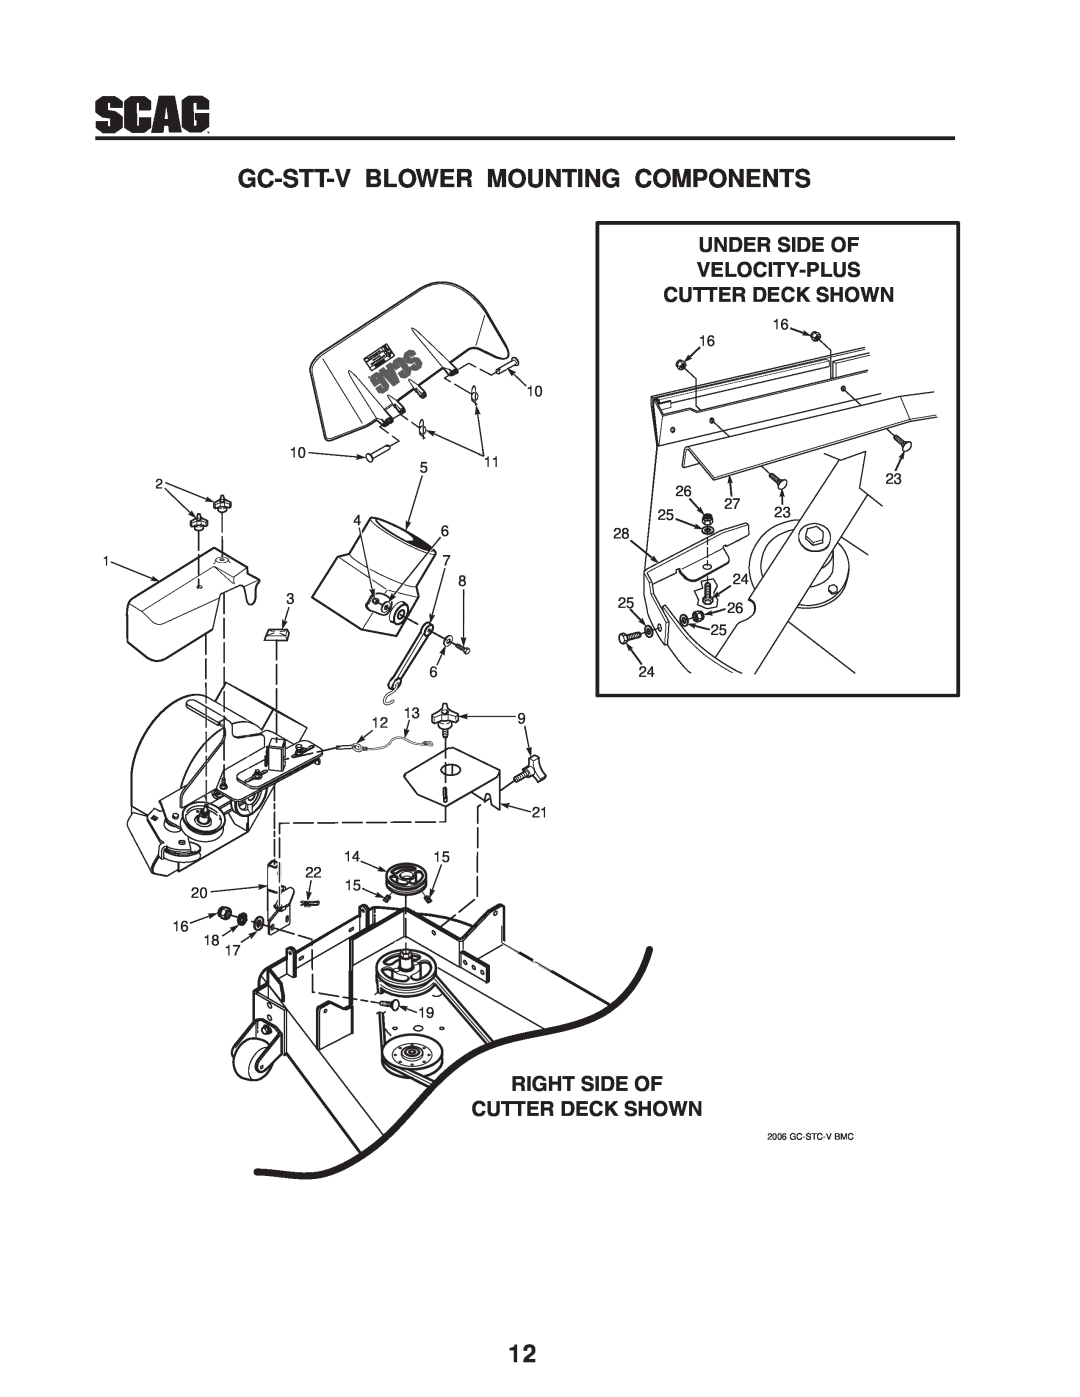 Scag Power Equipment GC-STT-CSV manual Gc-Stt-V Blower Mounting Components, Under Side Of, Velocity-Plus, Cutter Deck Shown 